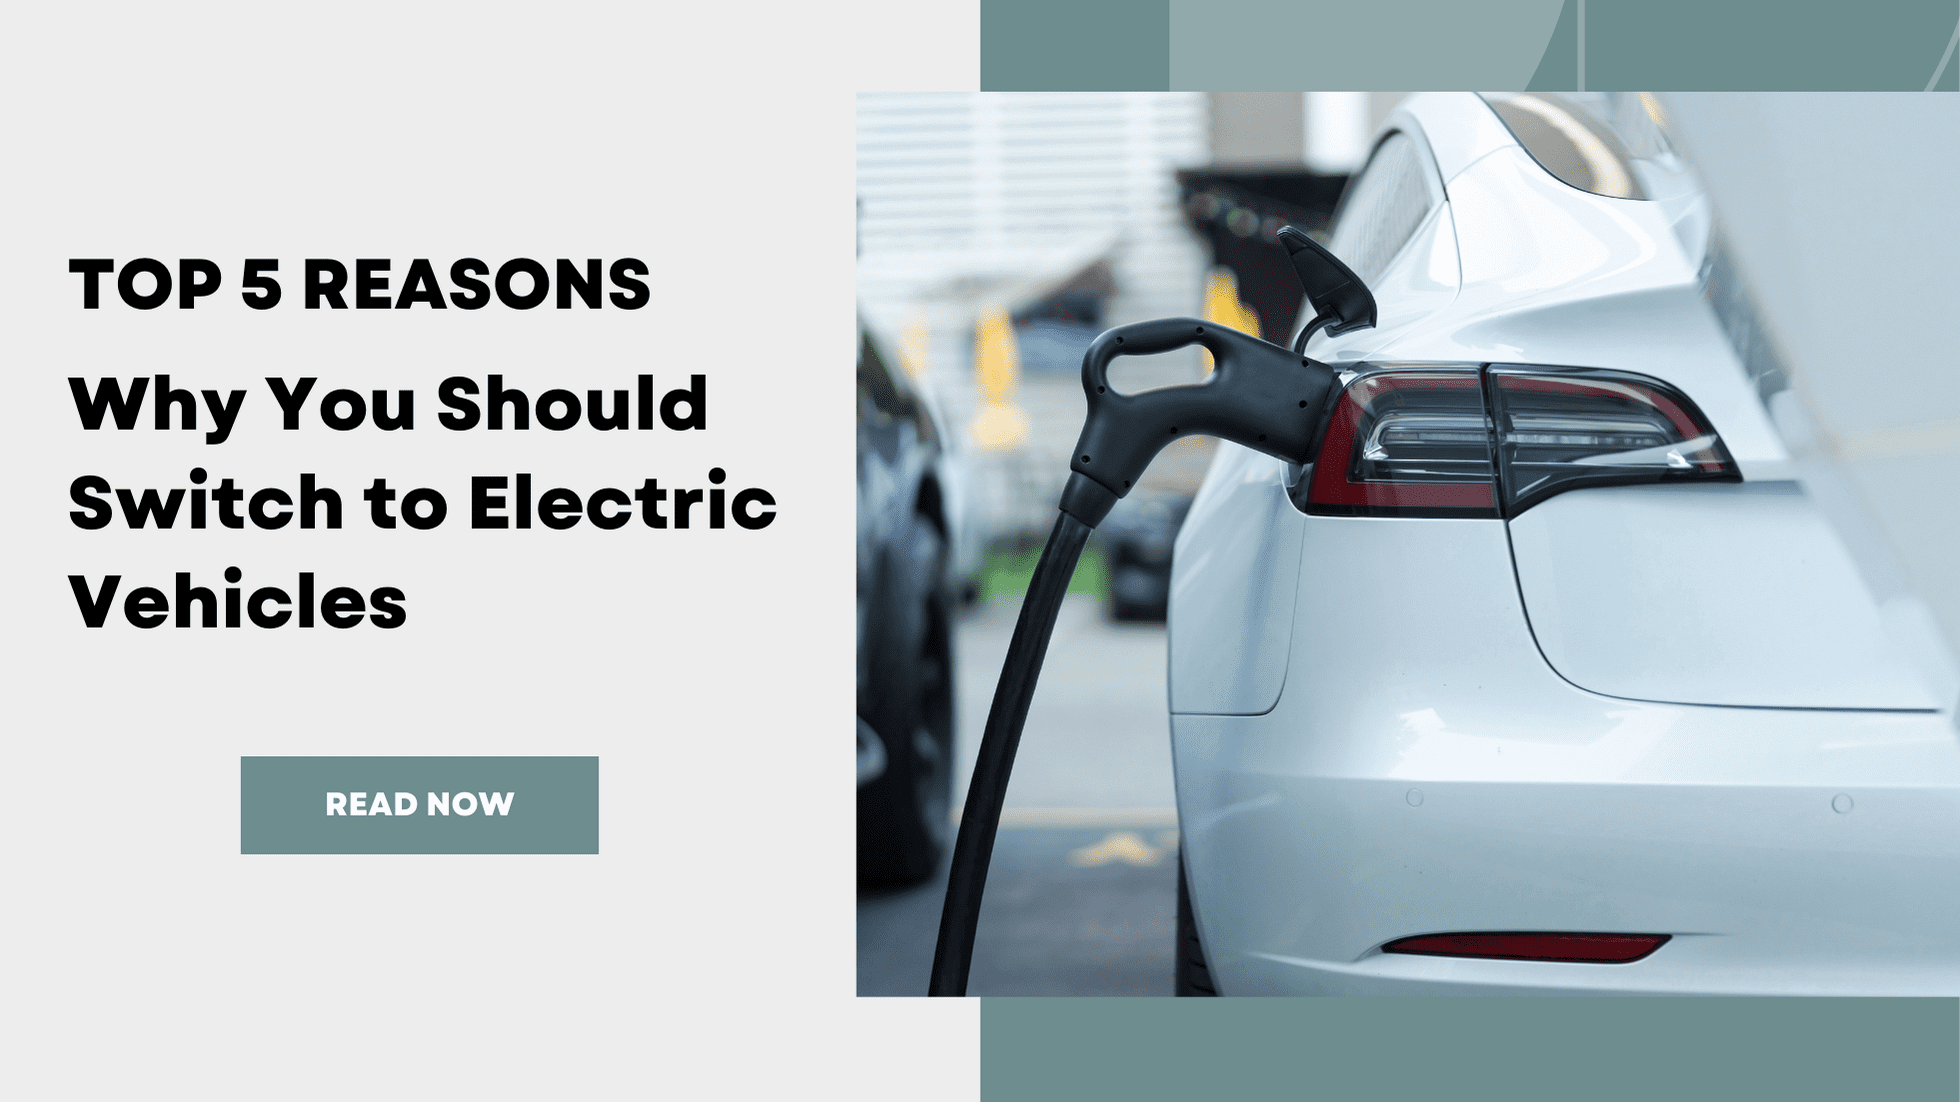 Top 5 Reasons Why You Should Choose Electric Vehicle in India